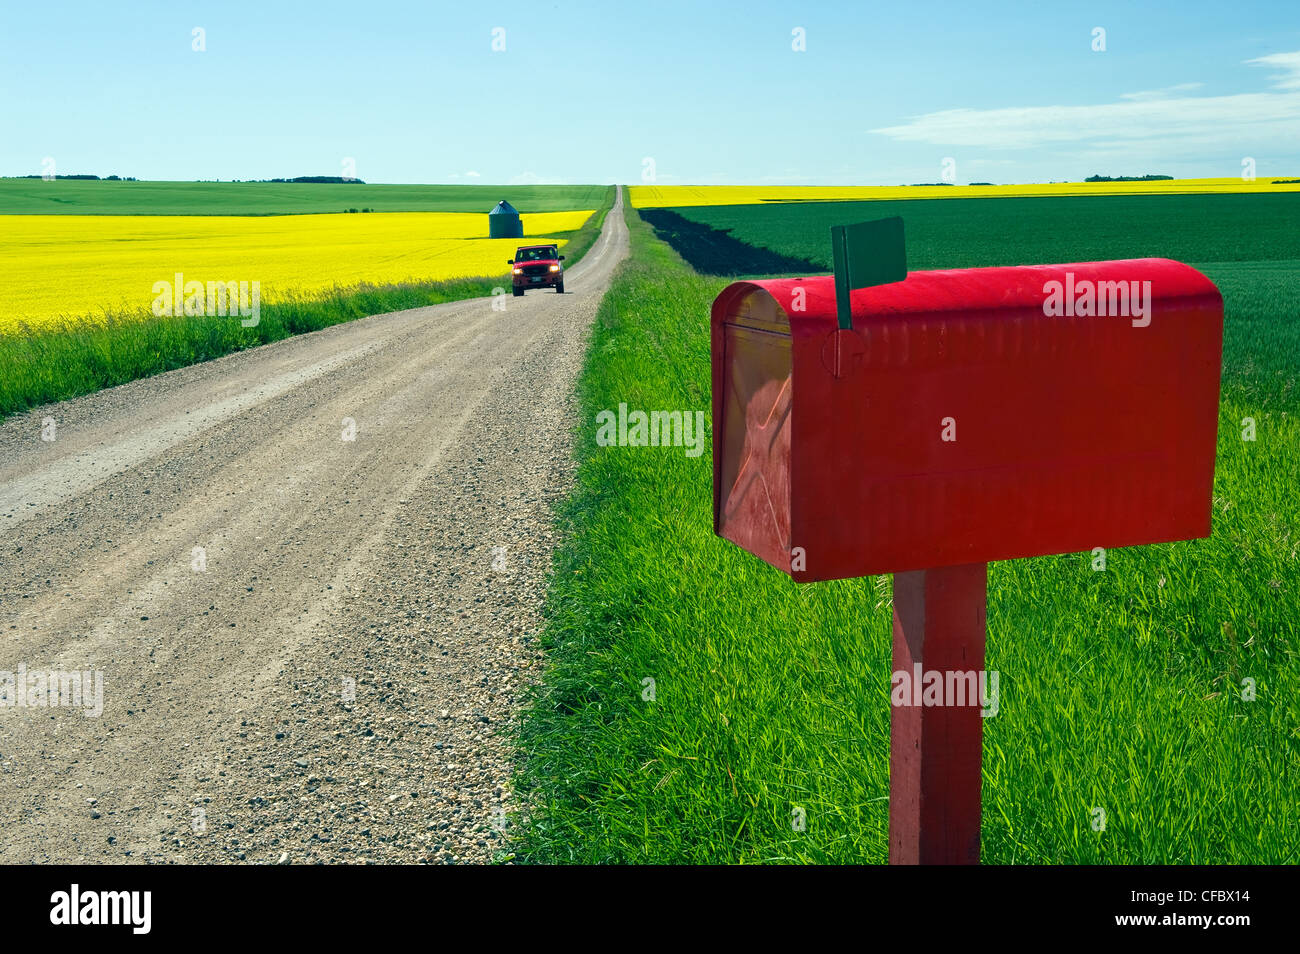 Country road between grain fields, Somerset, Manitoba, Canada Stock Photo